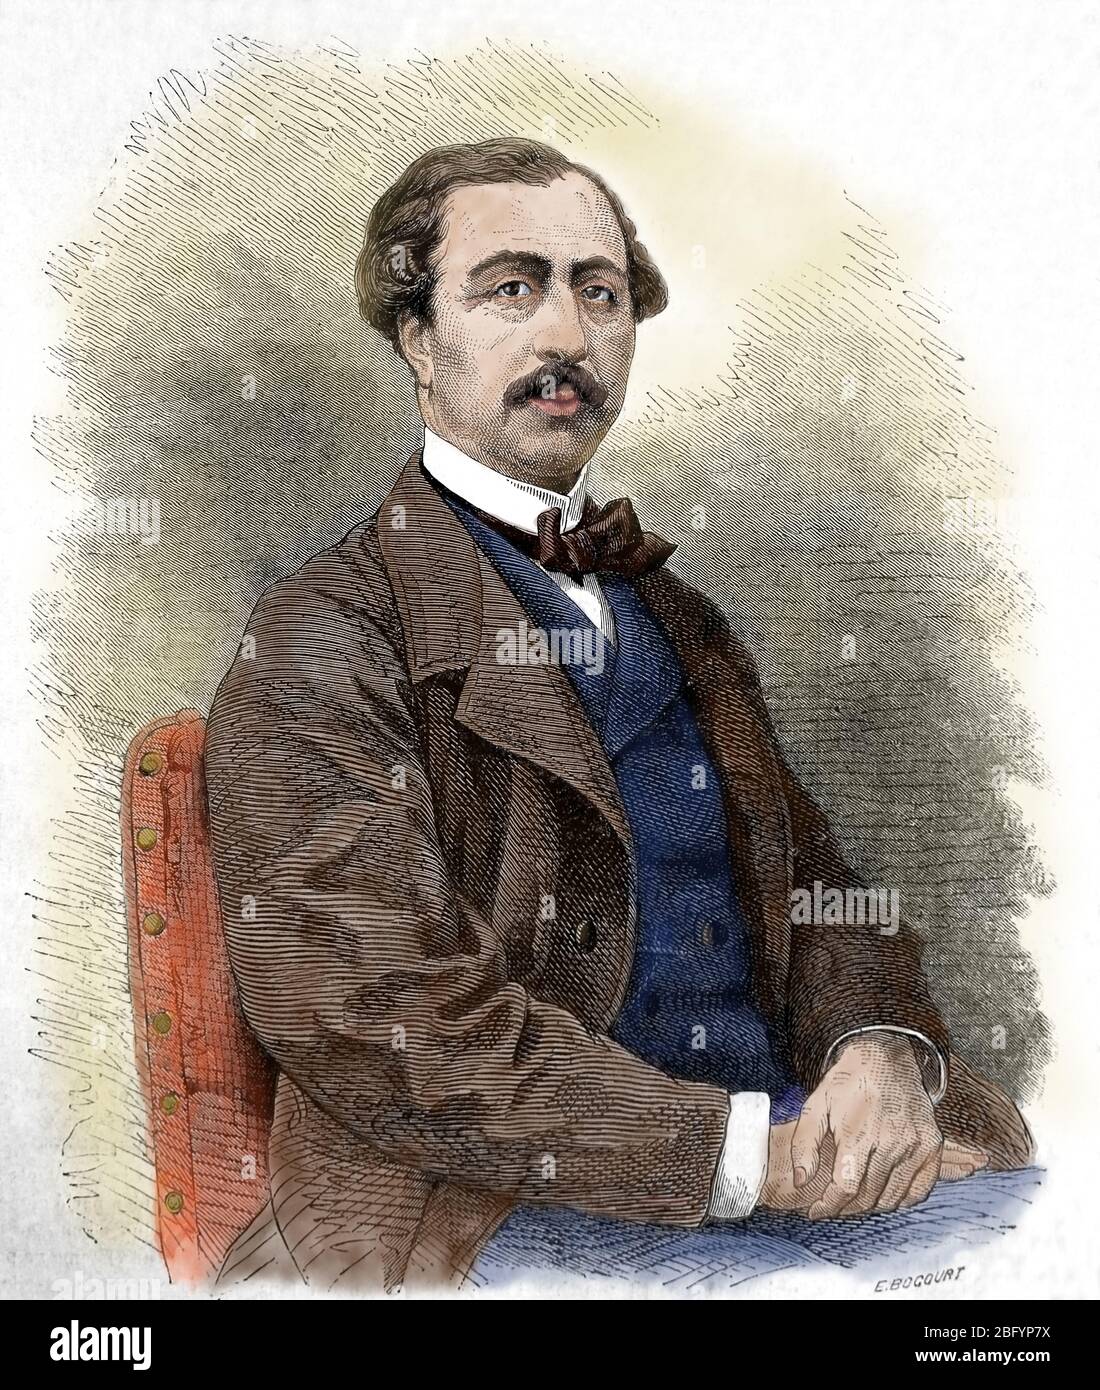 Lucien Anatole Prevost (1829-1870) French journalist, essayist and diplomat. Portrait, engraving by   E. Bocourt. Published in 1866. Stock Photo